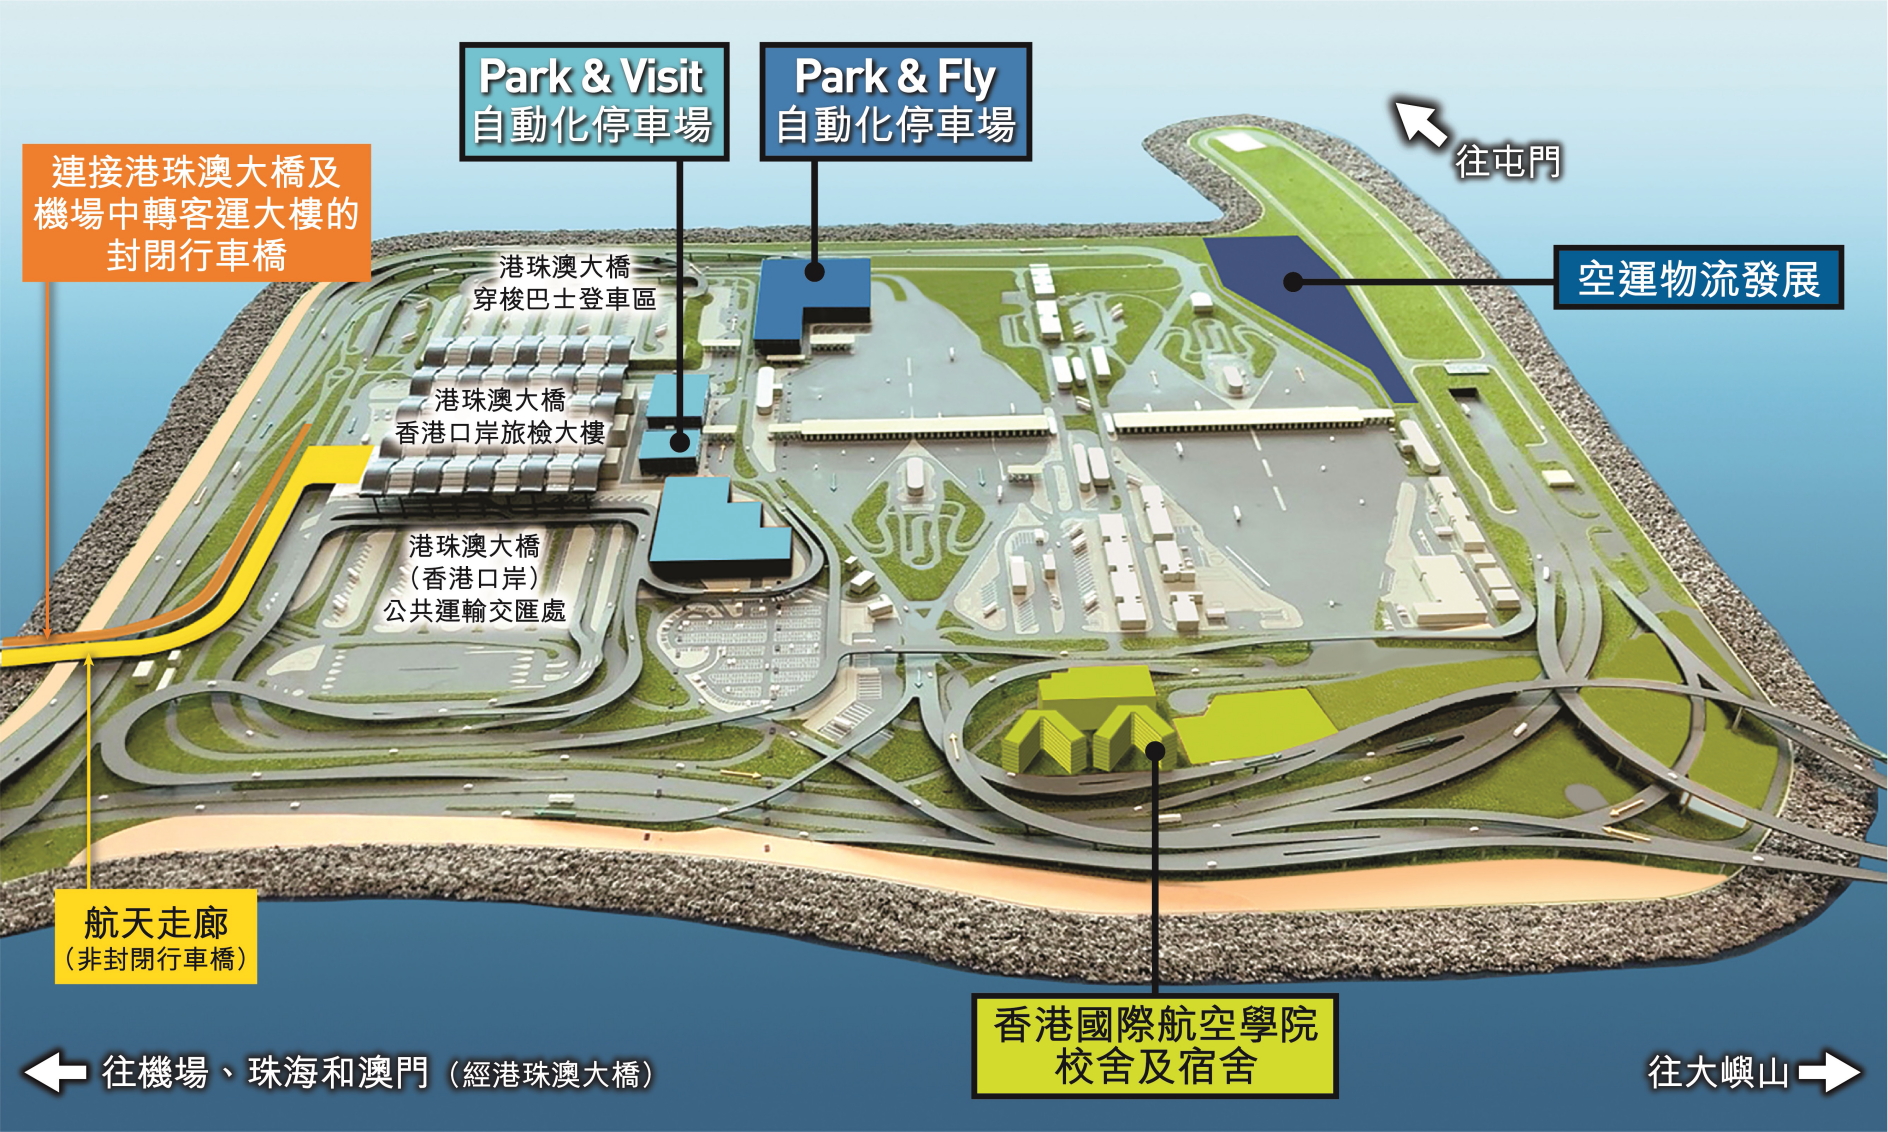 The Airport Authority's proposals for the development of the Hong Kong Boundary Crossing Facilities (HKBCF) Island of Hong Kong-Zhuhai-Macao Bridge (HZMB) focus on enhancing HKIA’s services and development as part of the Airport City strategy. Click to enlarge.